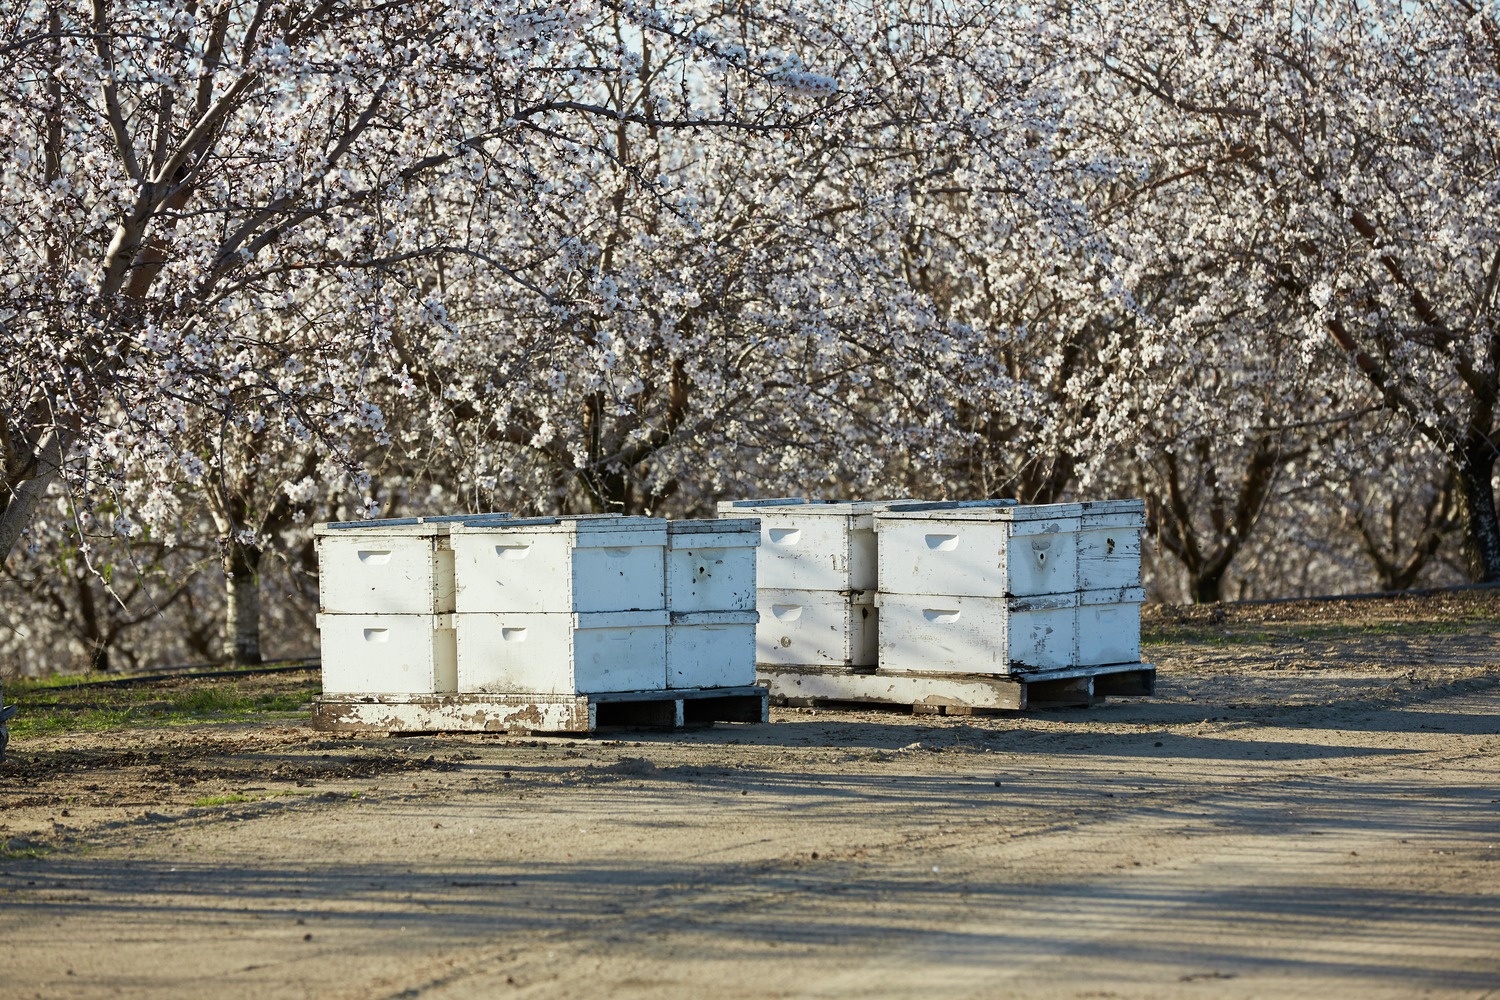 Bees in the orchard